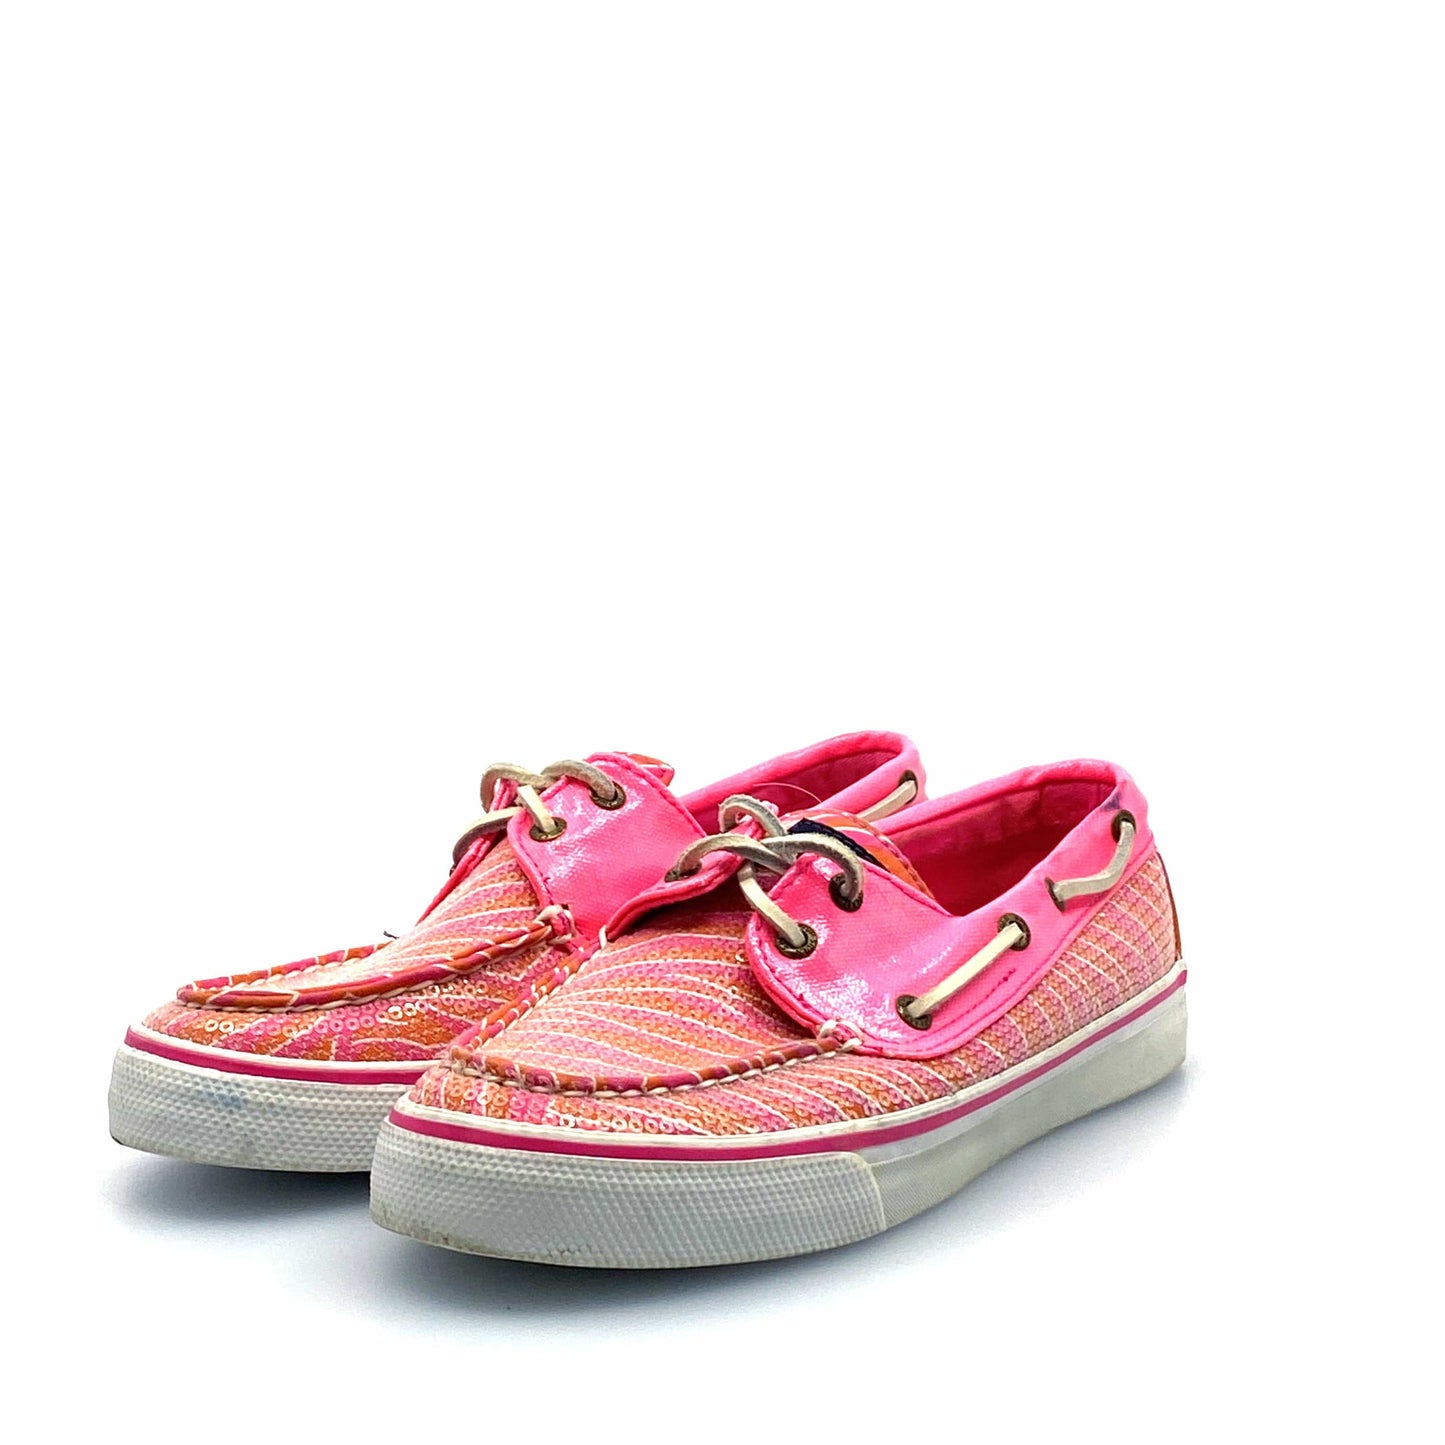 SPERRY Top-Sider Womens Size 6.5M Pink Sequined Boat Shoes Textured Patent Leather